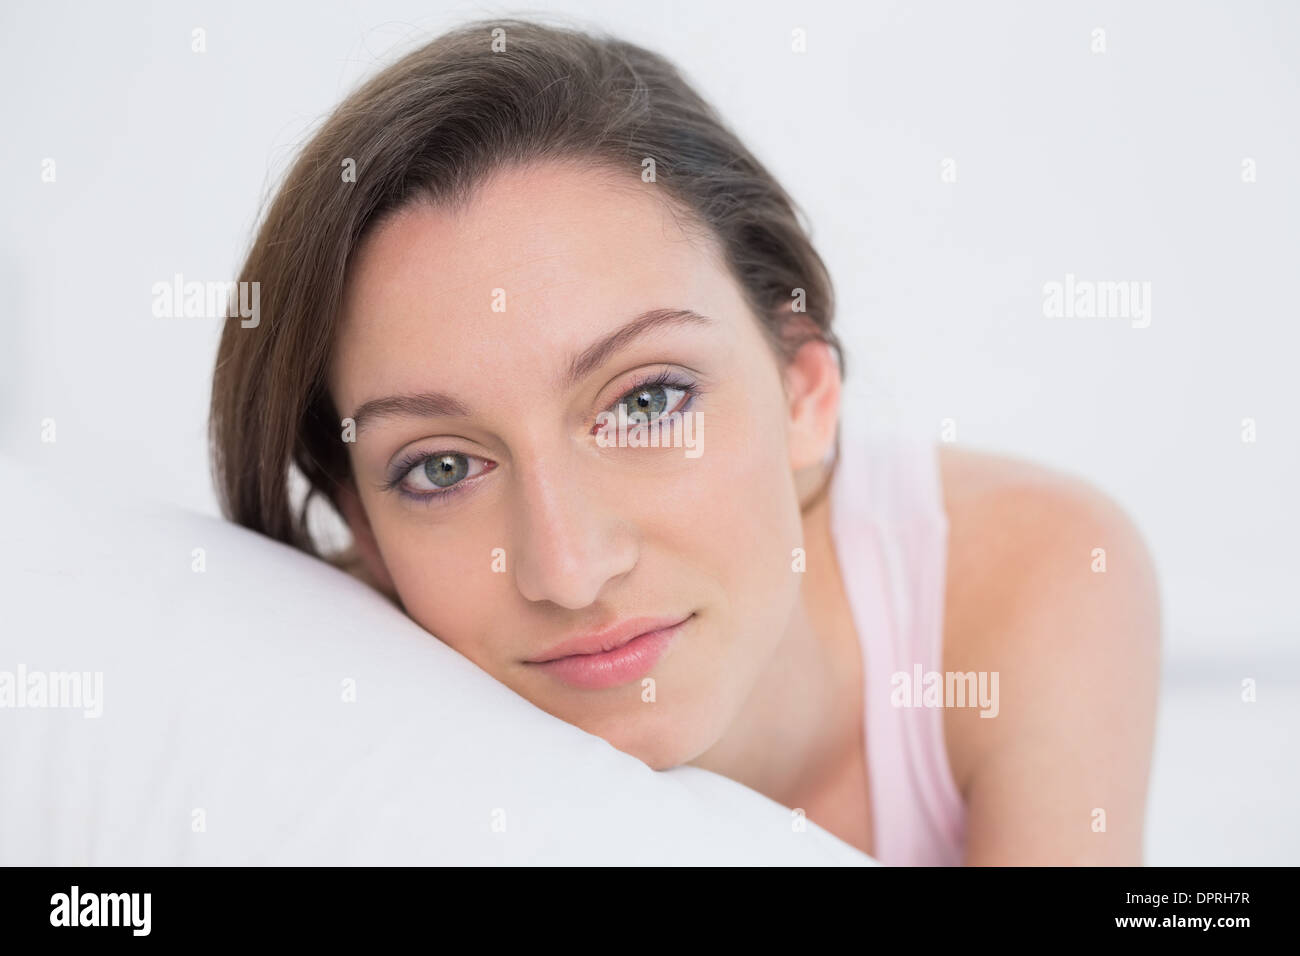 Close up portrait of a pretty woman resting in bed Stock Photo